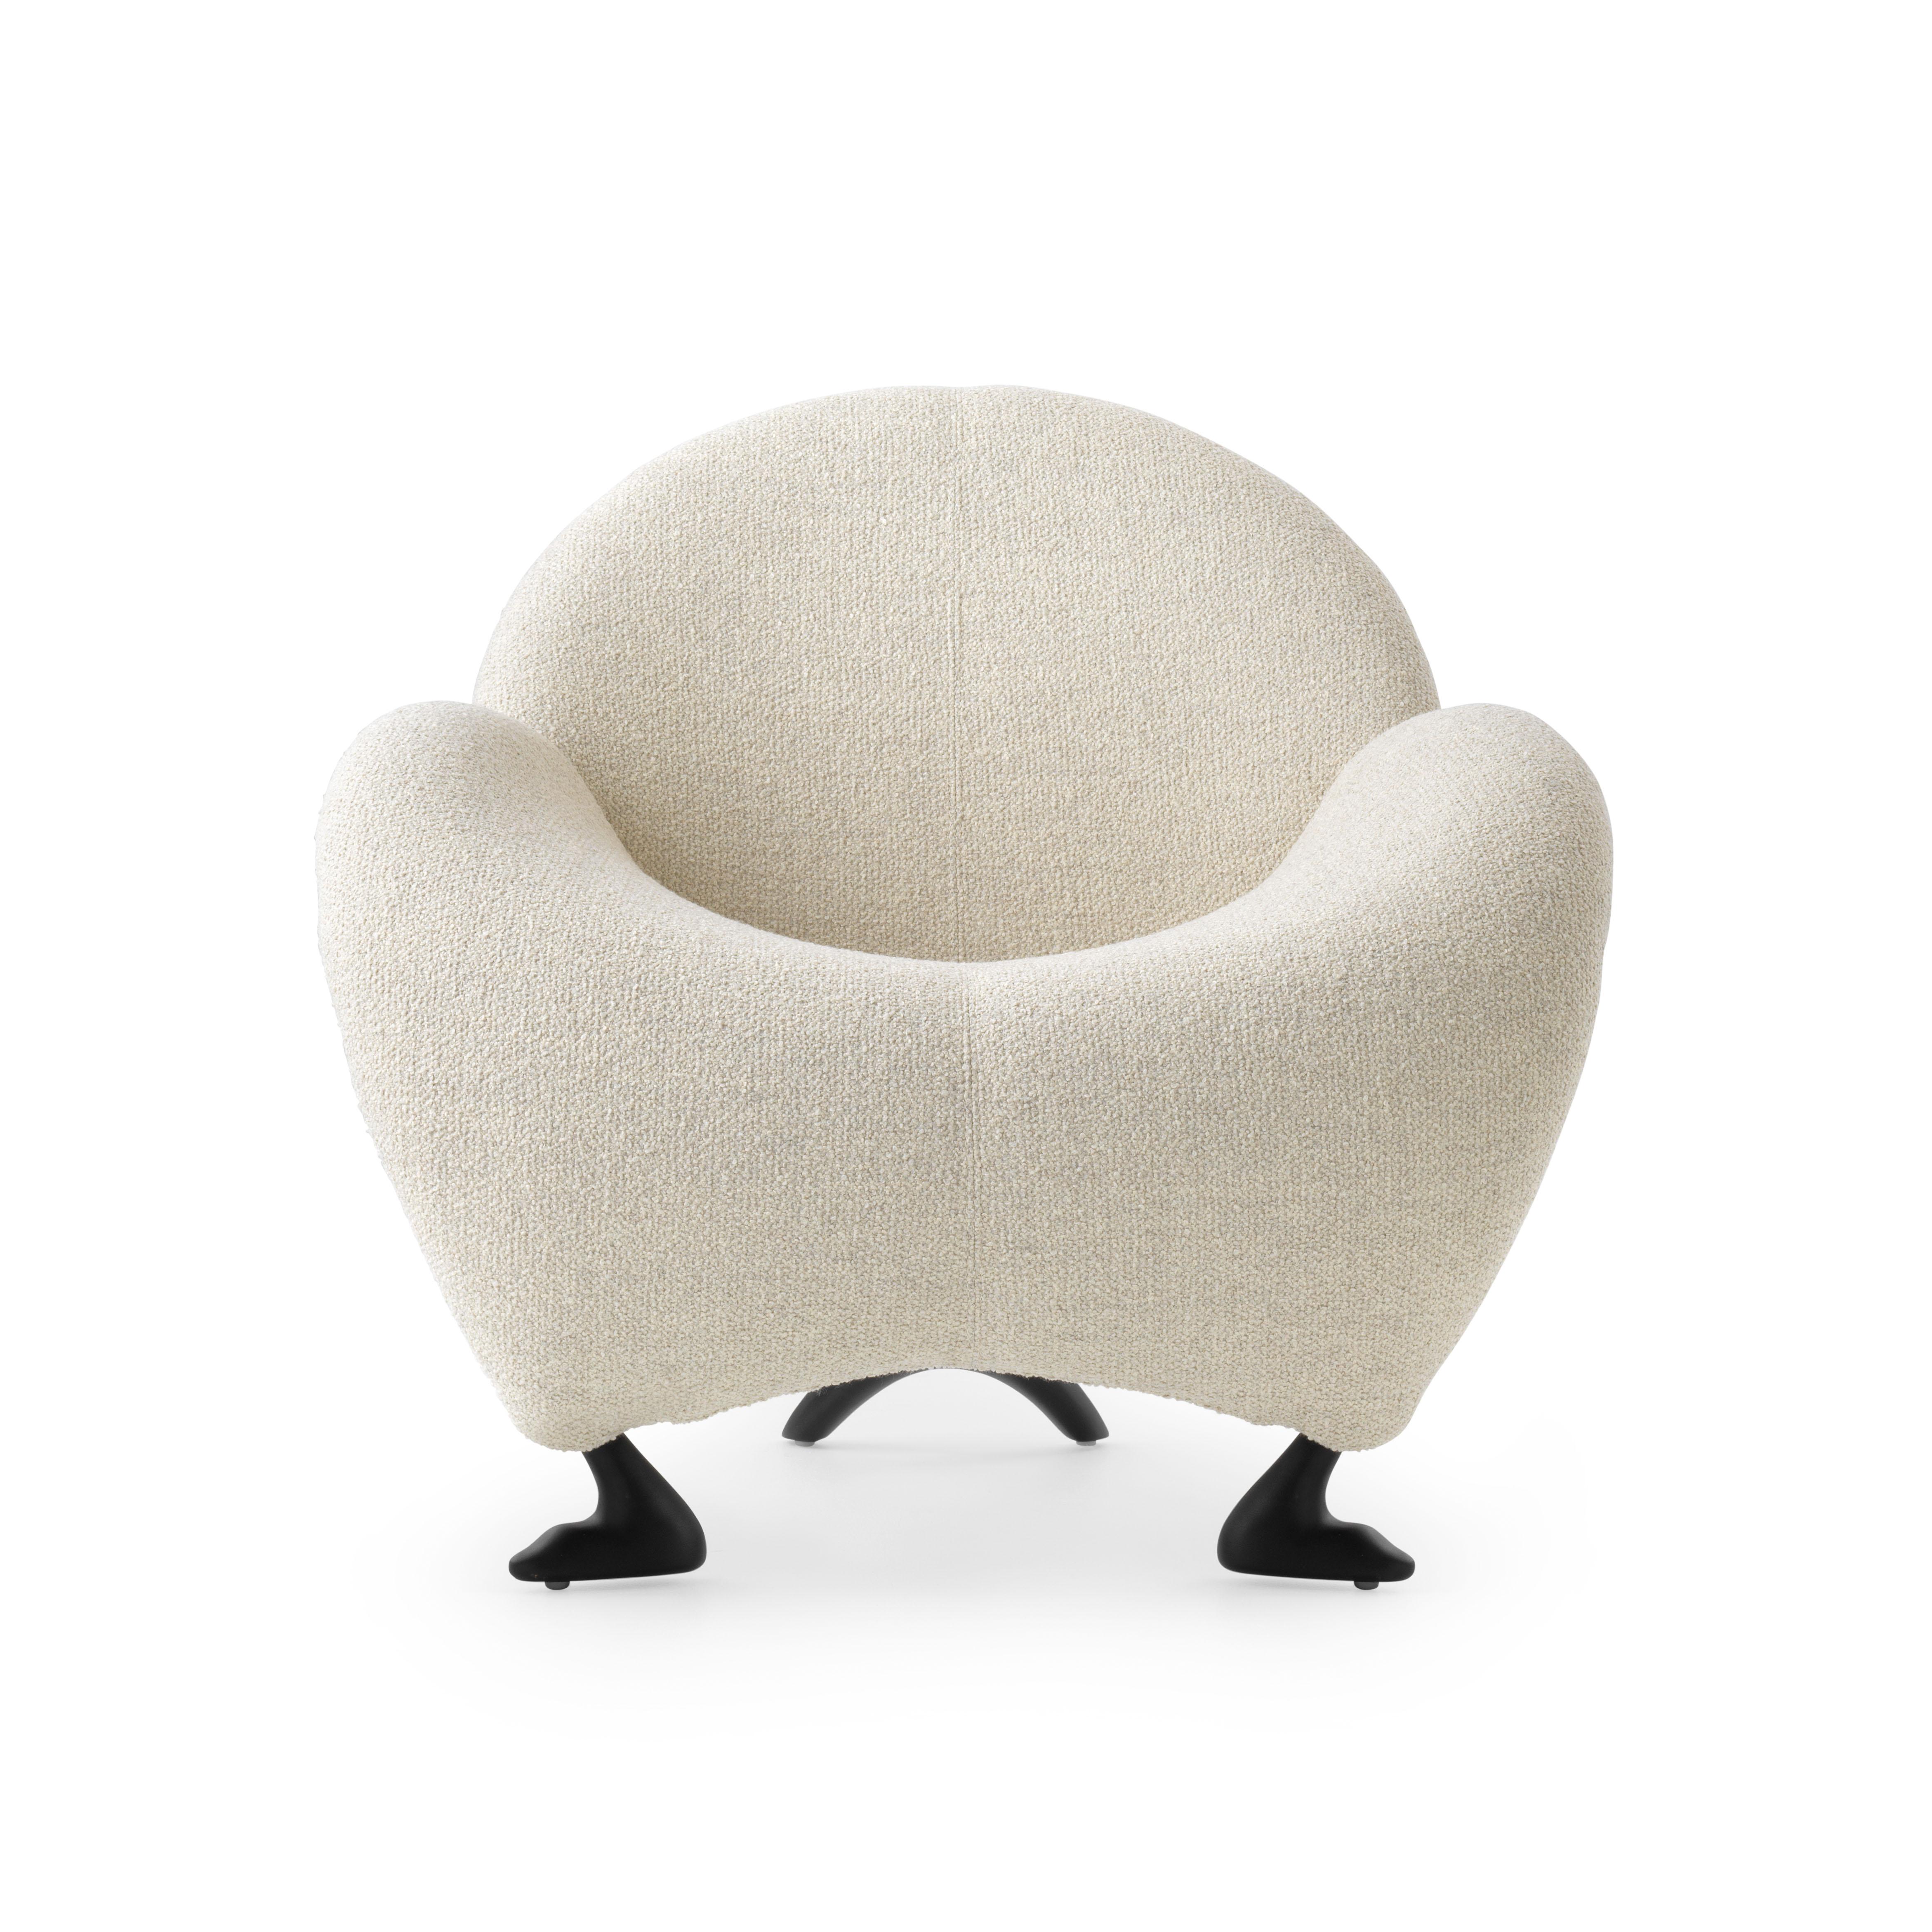 Organic Modern Papageno Chair by Leolux Upholstered in Bouclé Fabric 'Monza 00' For Sale